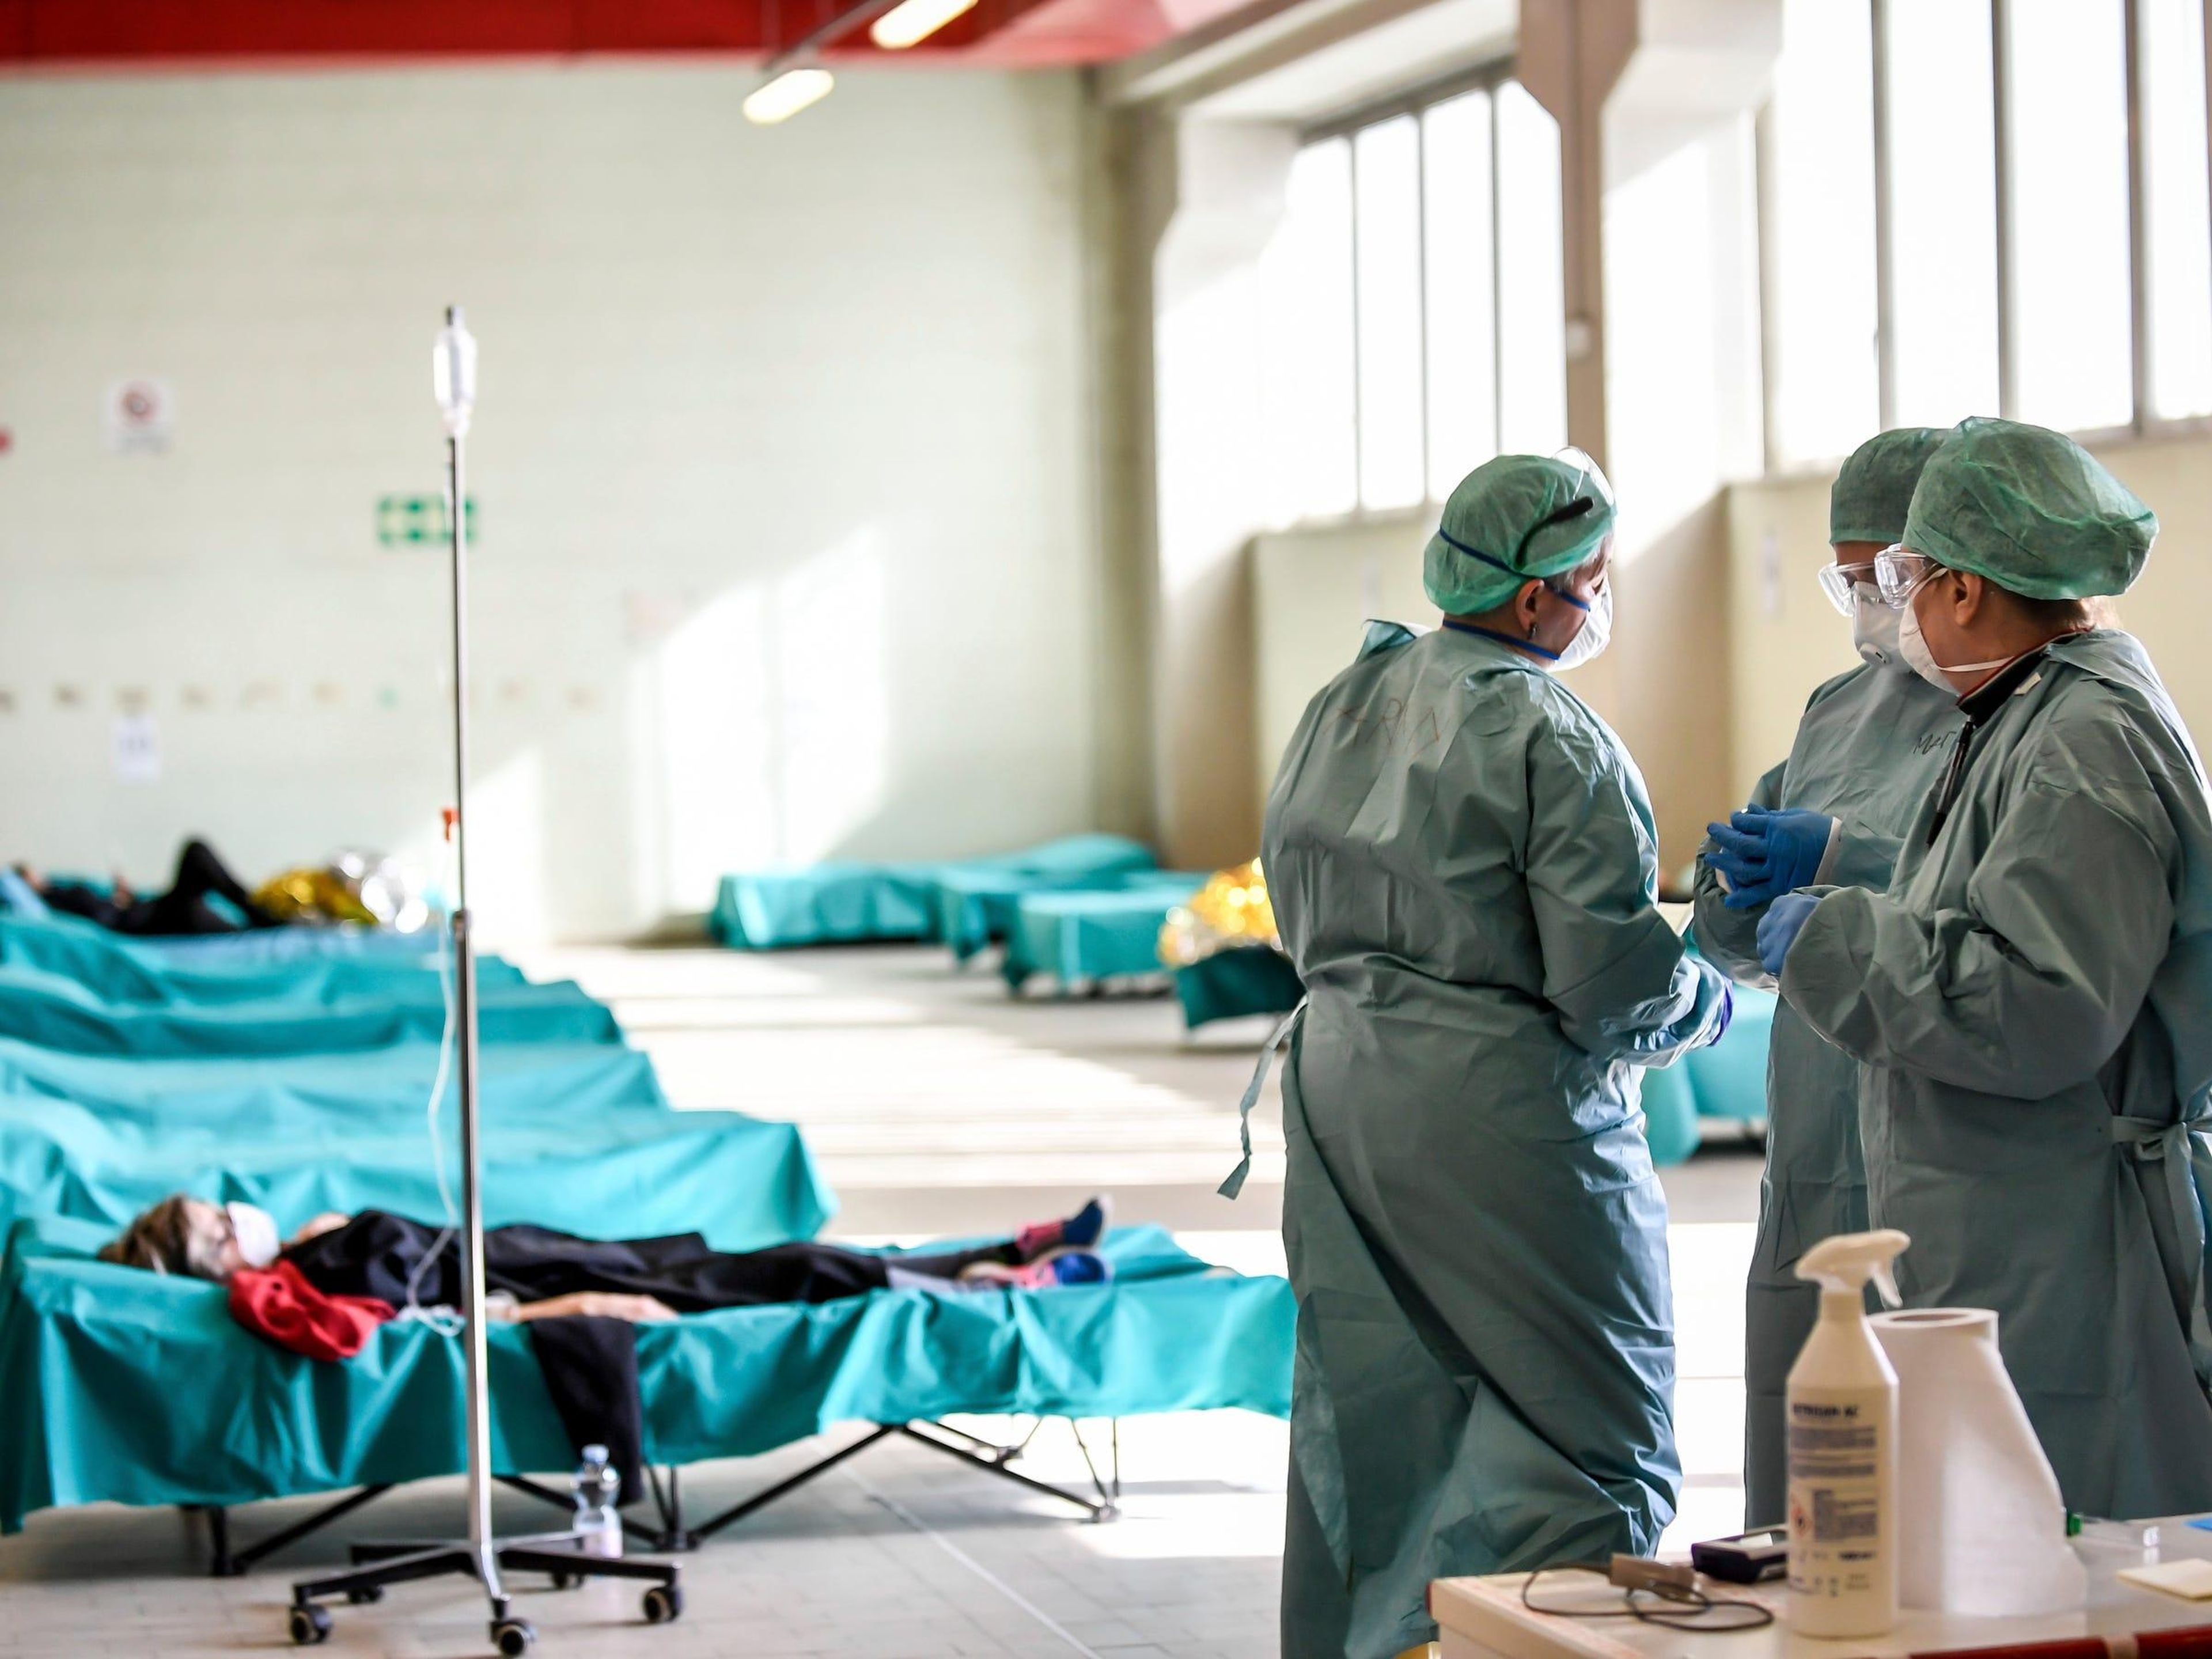 Medical personnel work inside one of the emergency structures that were set up to ease procedures at the hospital of Brescia, Italy, on March 10, 2020.